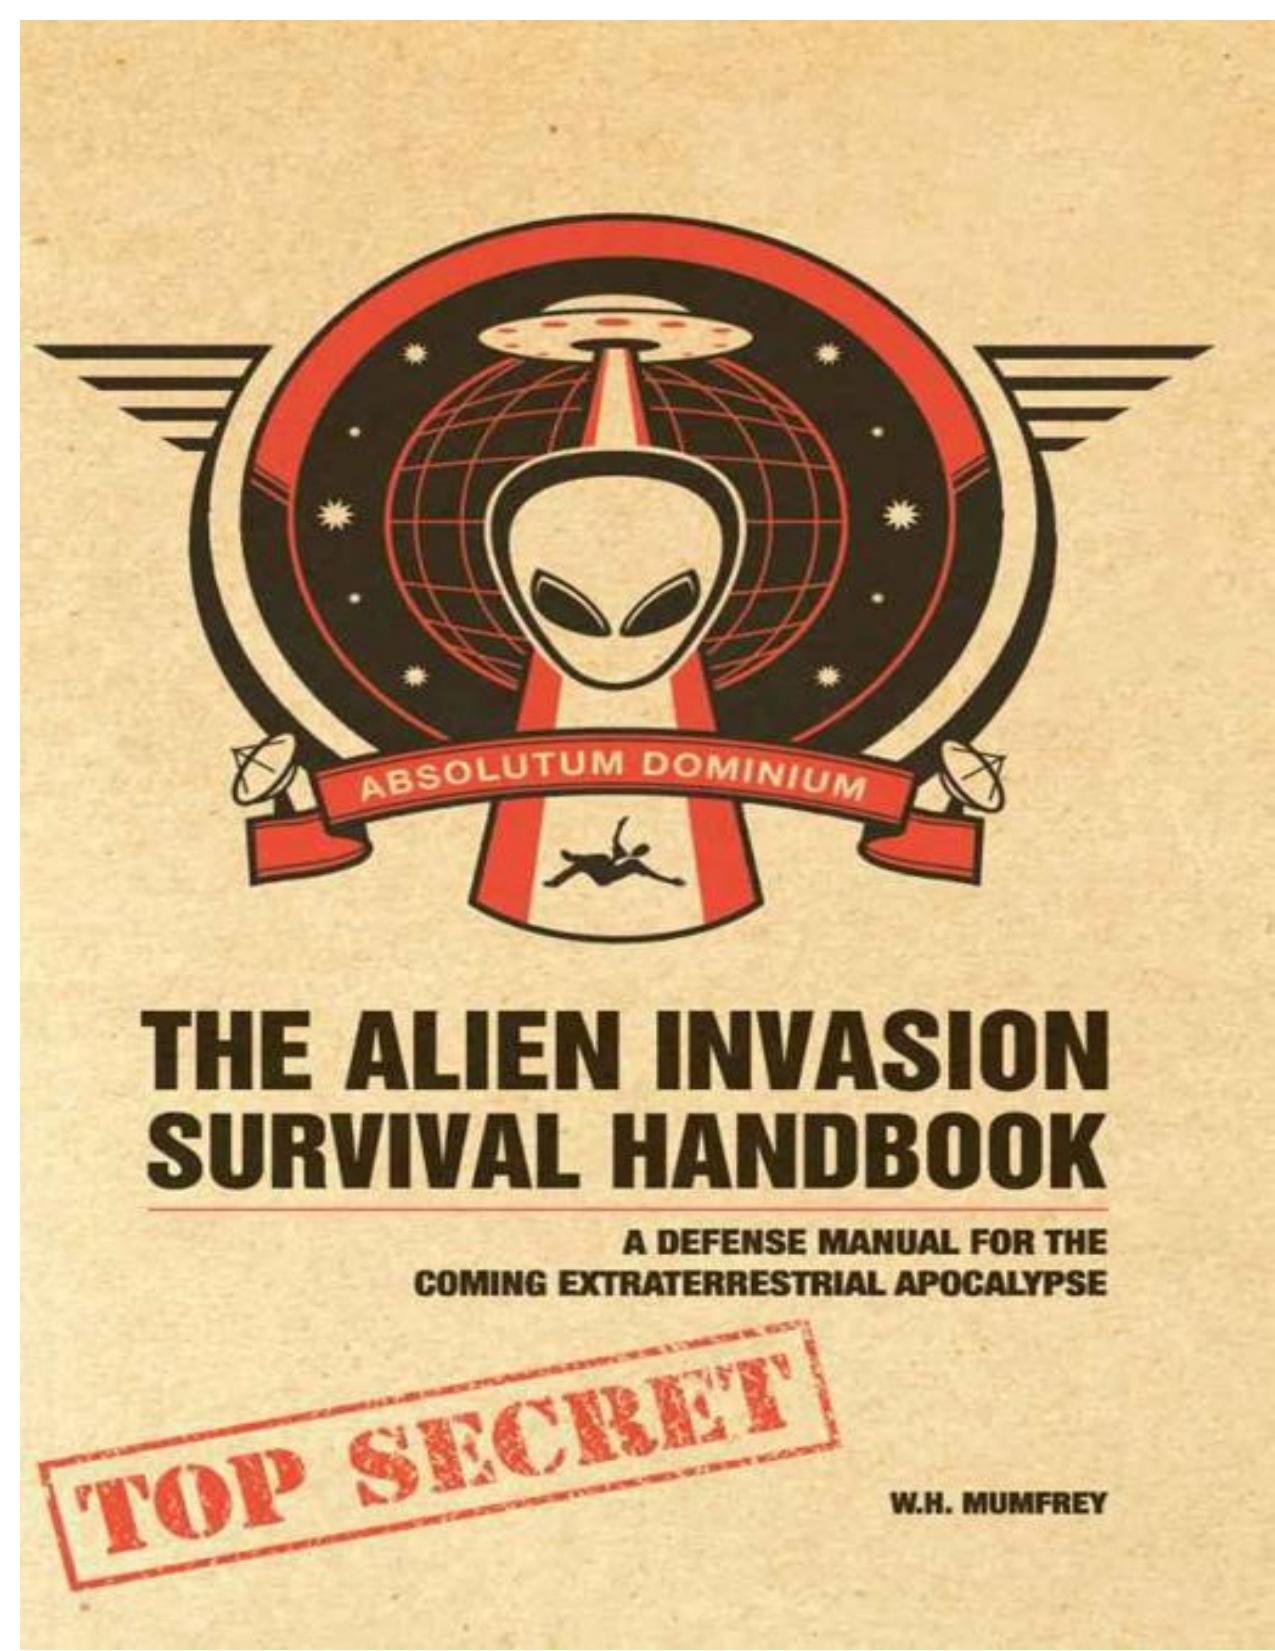 The Alien Invasion Survival Handbook: A Defense Manual for the Coming Extraterrestrial Apocalypse by Mumfrey W. H